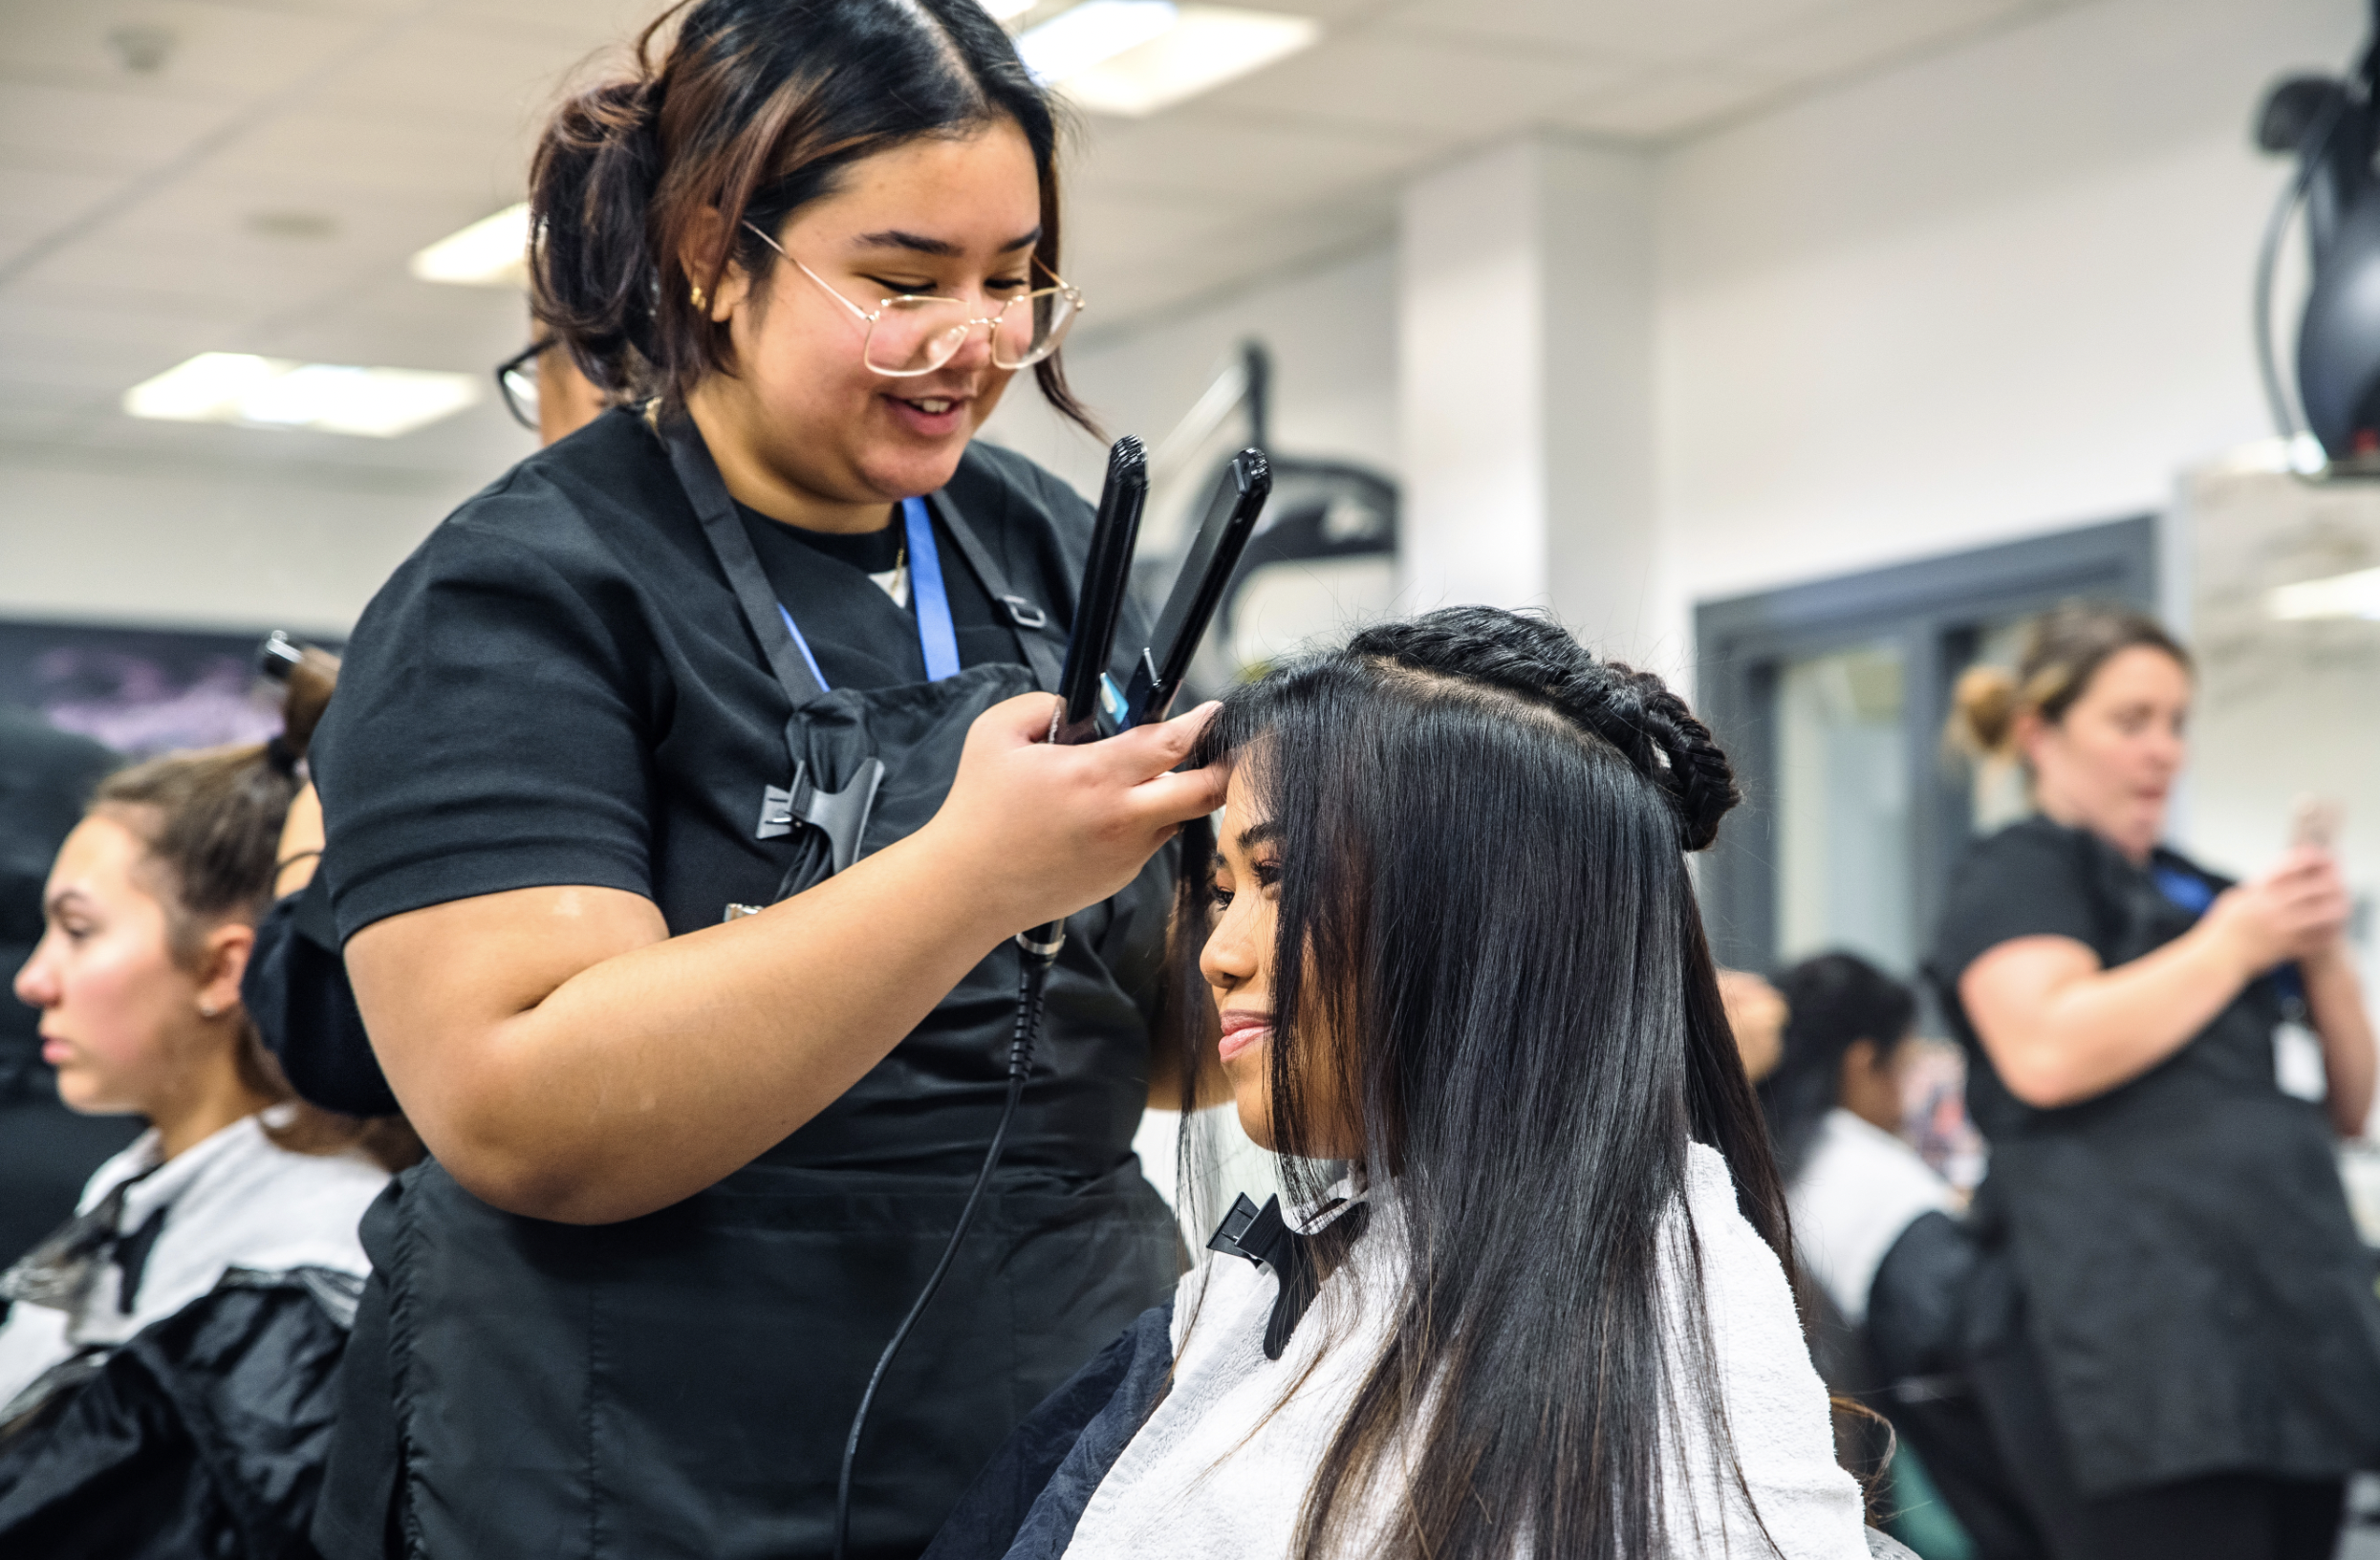 Hair & Beauty students take part in Competition 